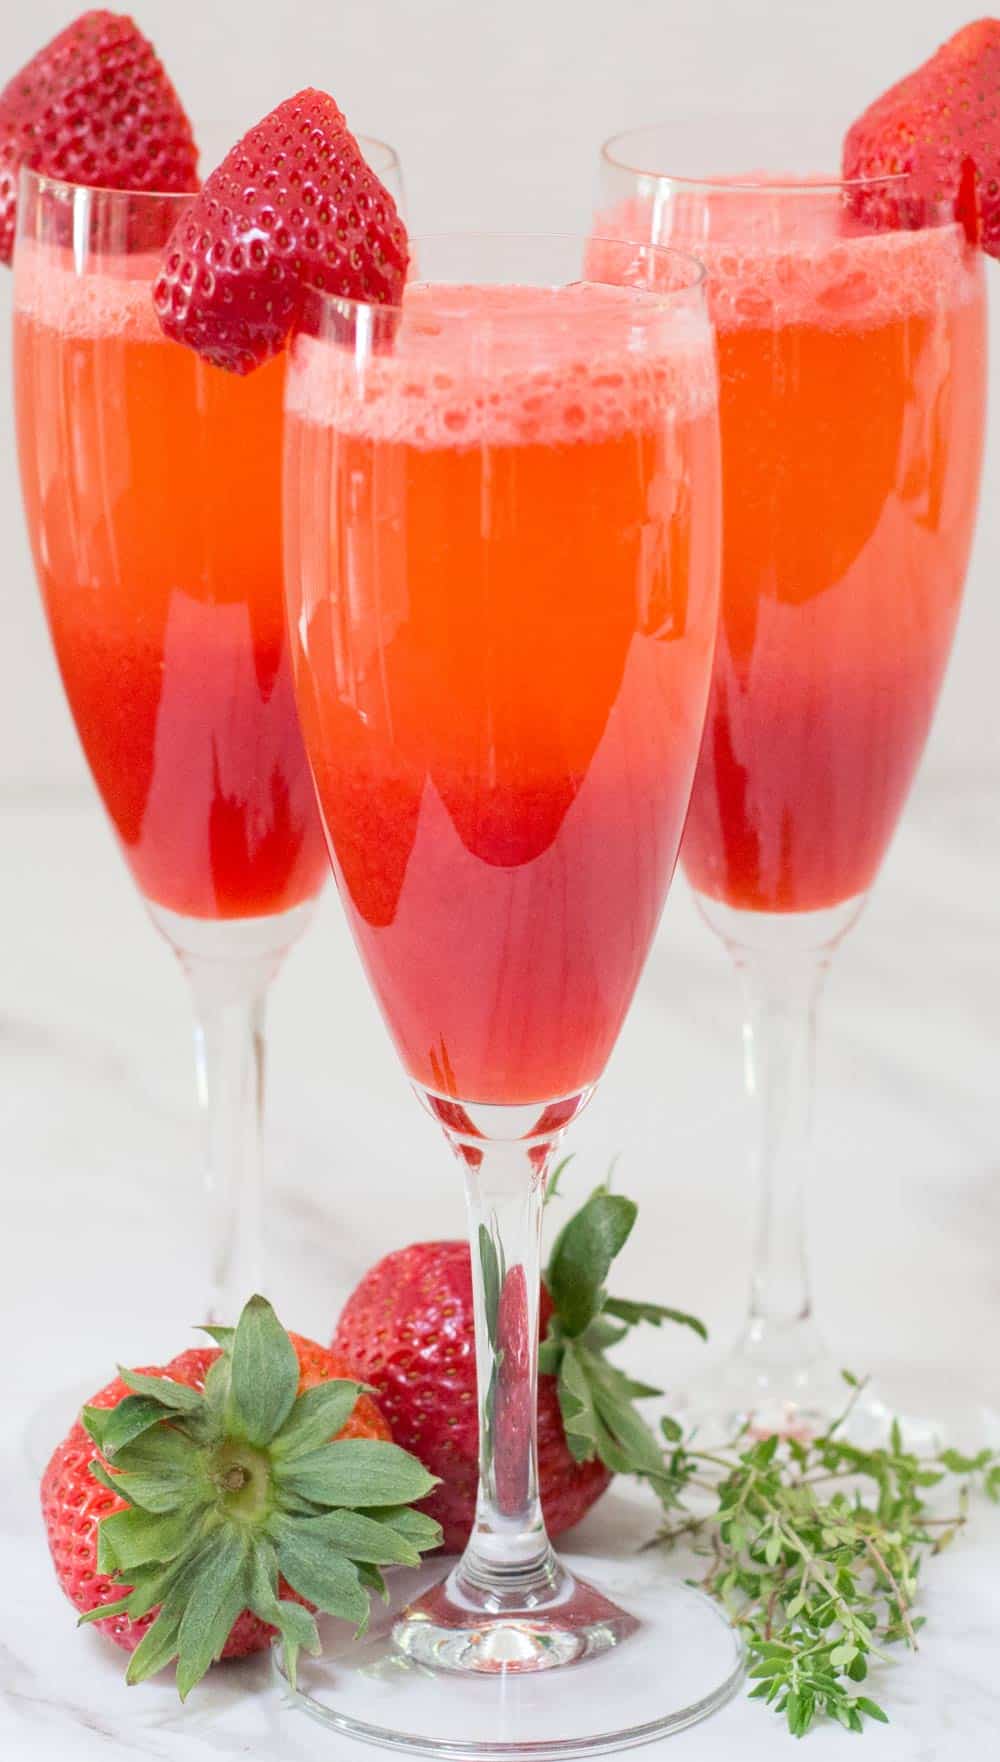 3 champagne glasses filled with strawberry bellini 